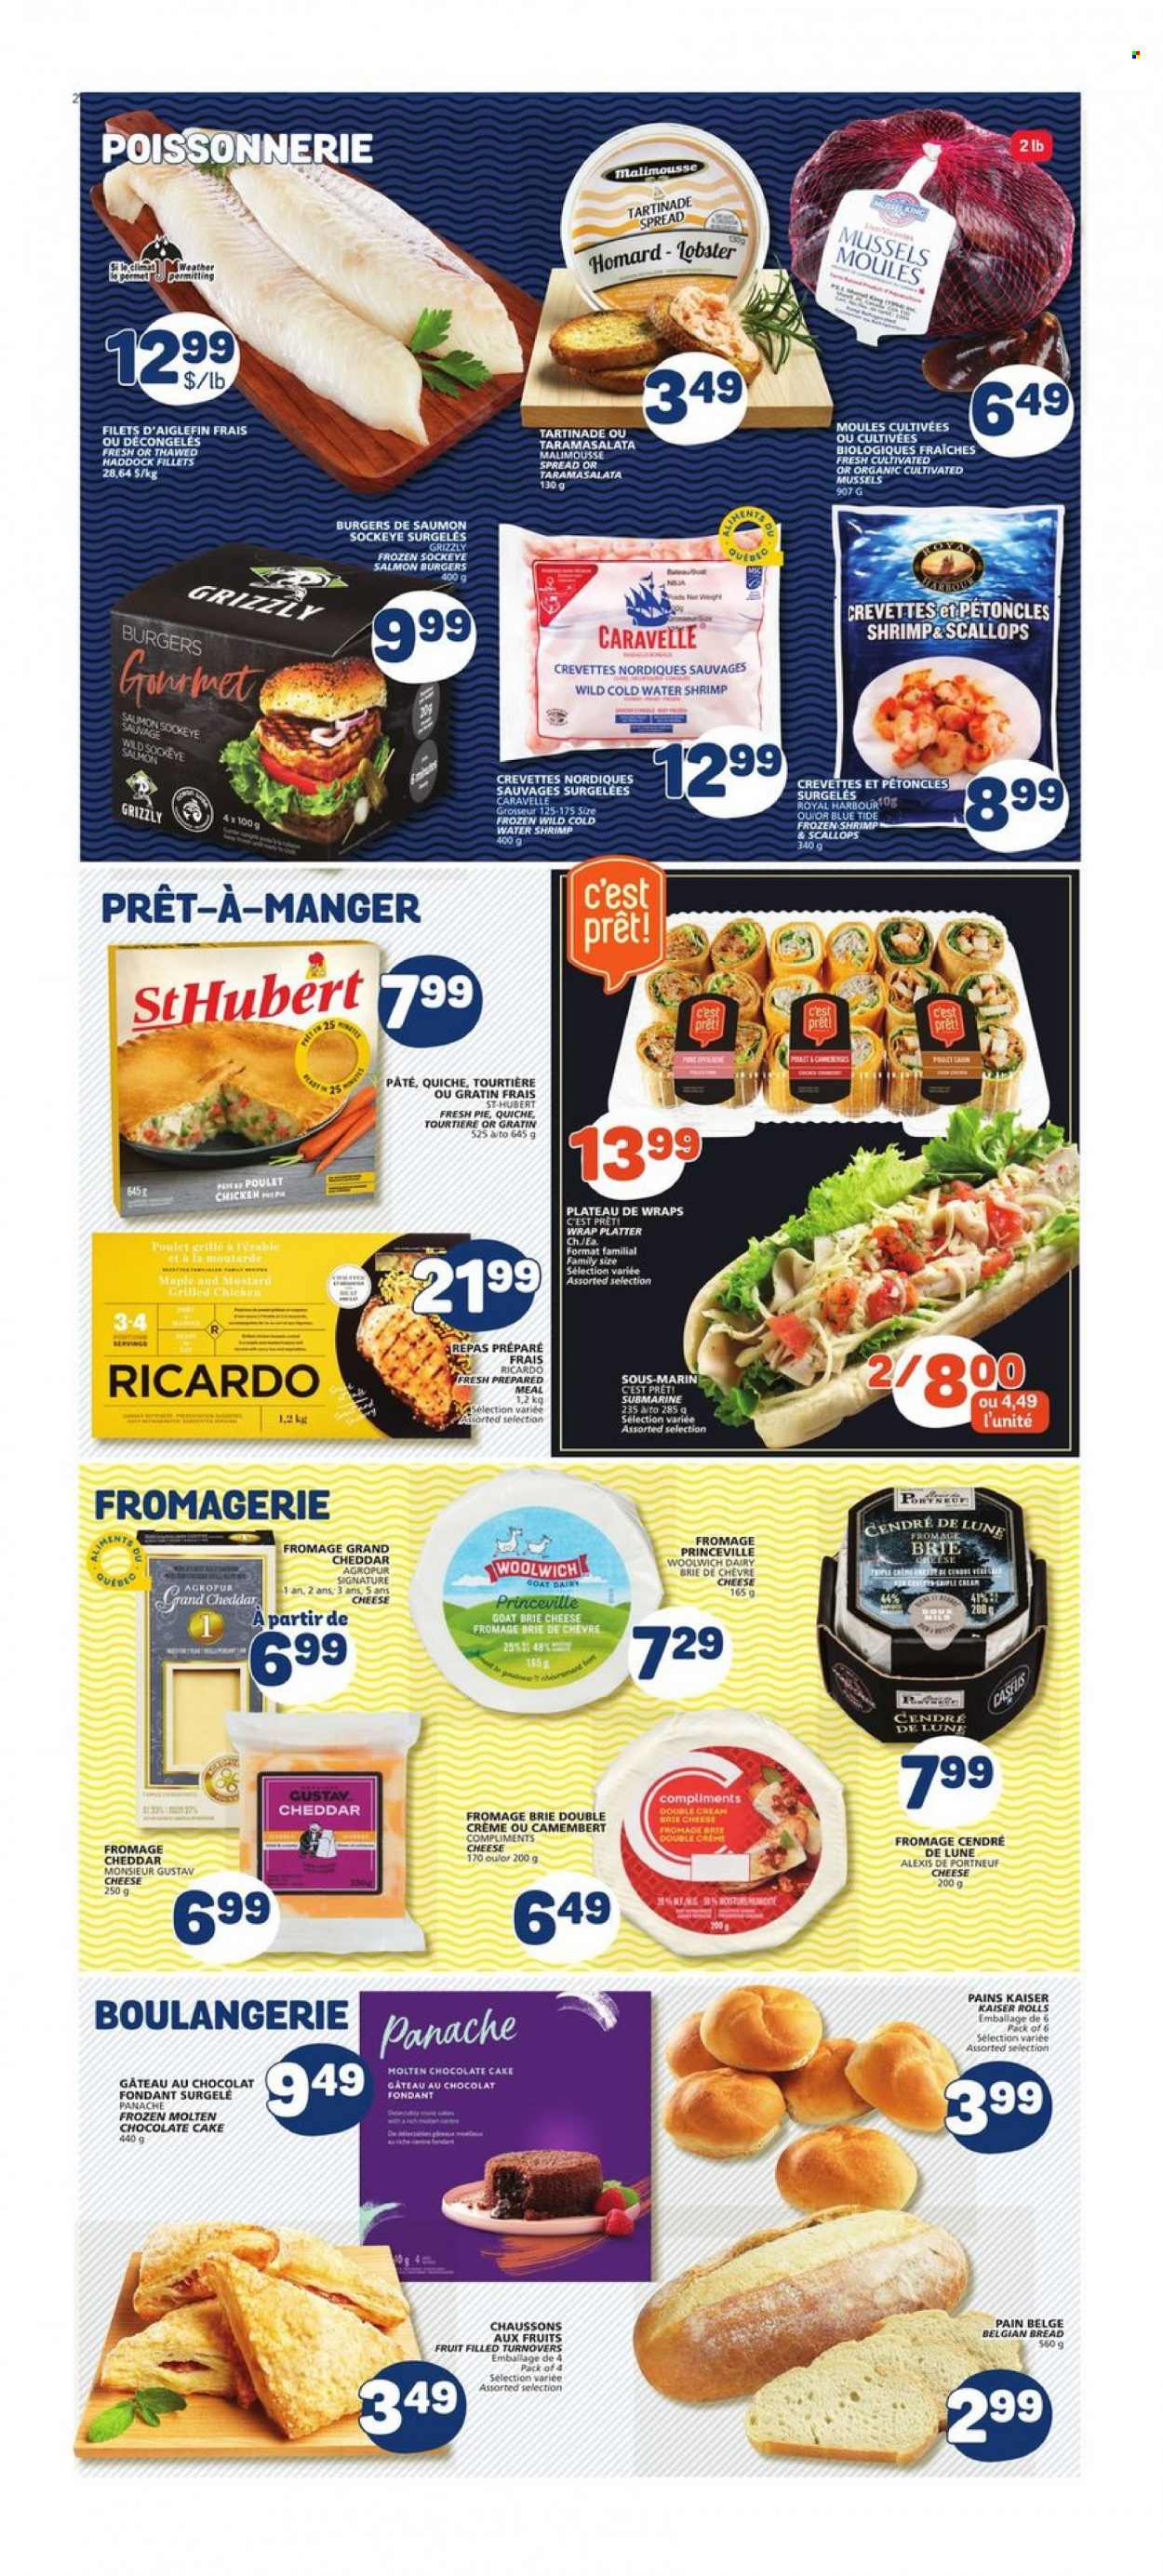 thumbnail - Marché Bonichoix Flyer - June 30, 2022 - July 06, 2022 - Sales products - bread, cake, pie, turnovers, wraps, chocolate cake, lobster, mussels, salmon, scallops, haddock, shrimps, hamburger, cheddar, cheese, brie, quiche, chocolate, mustard, Tide, camembert. Page 2.